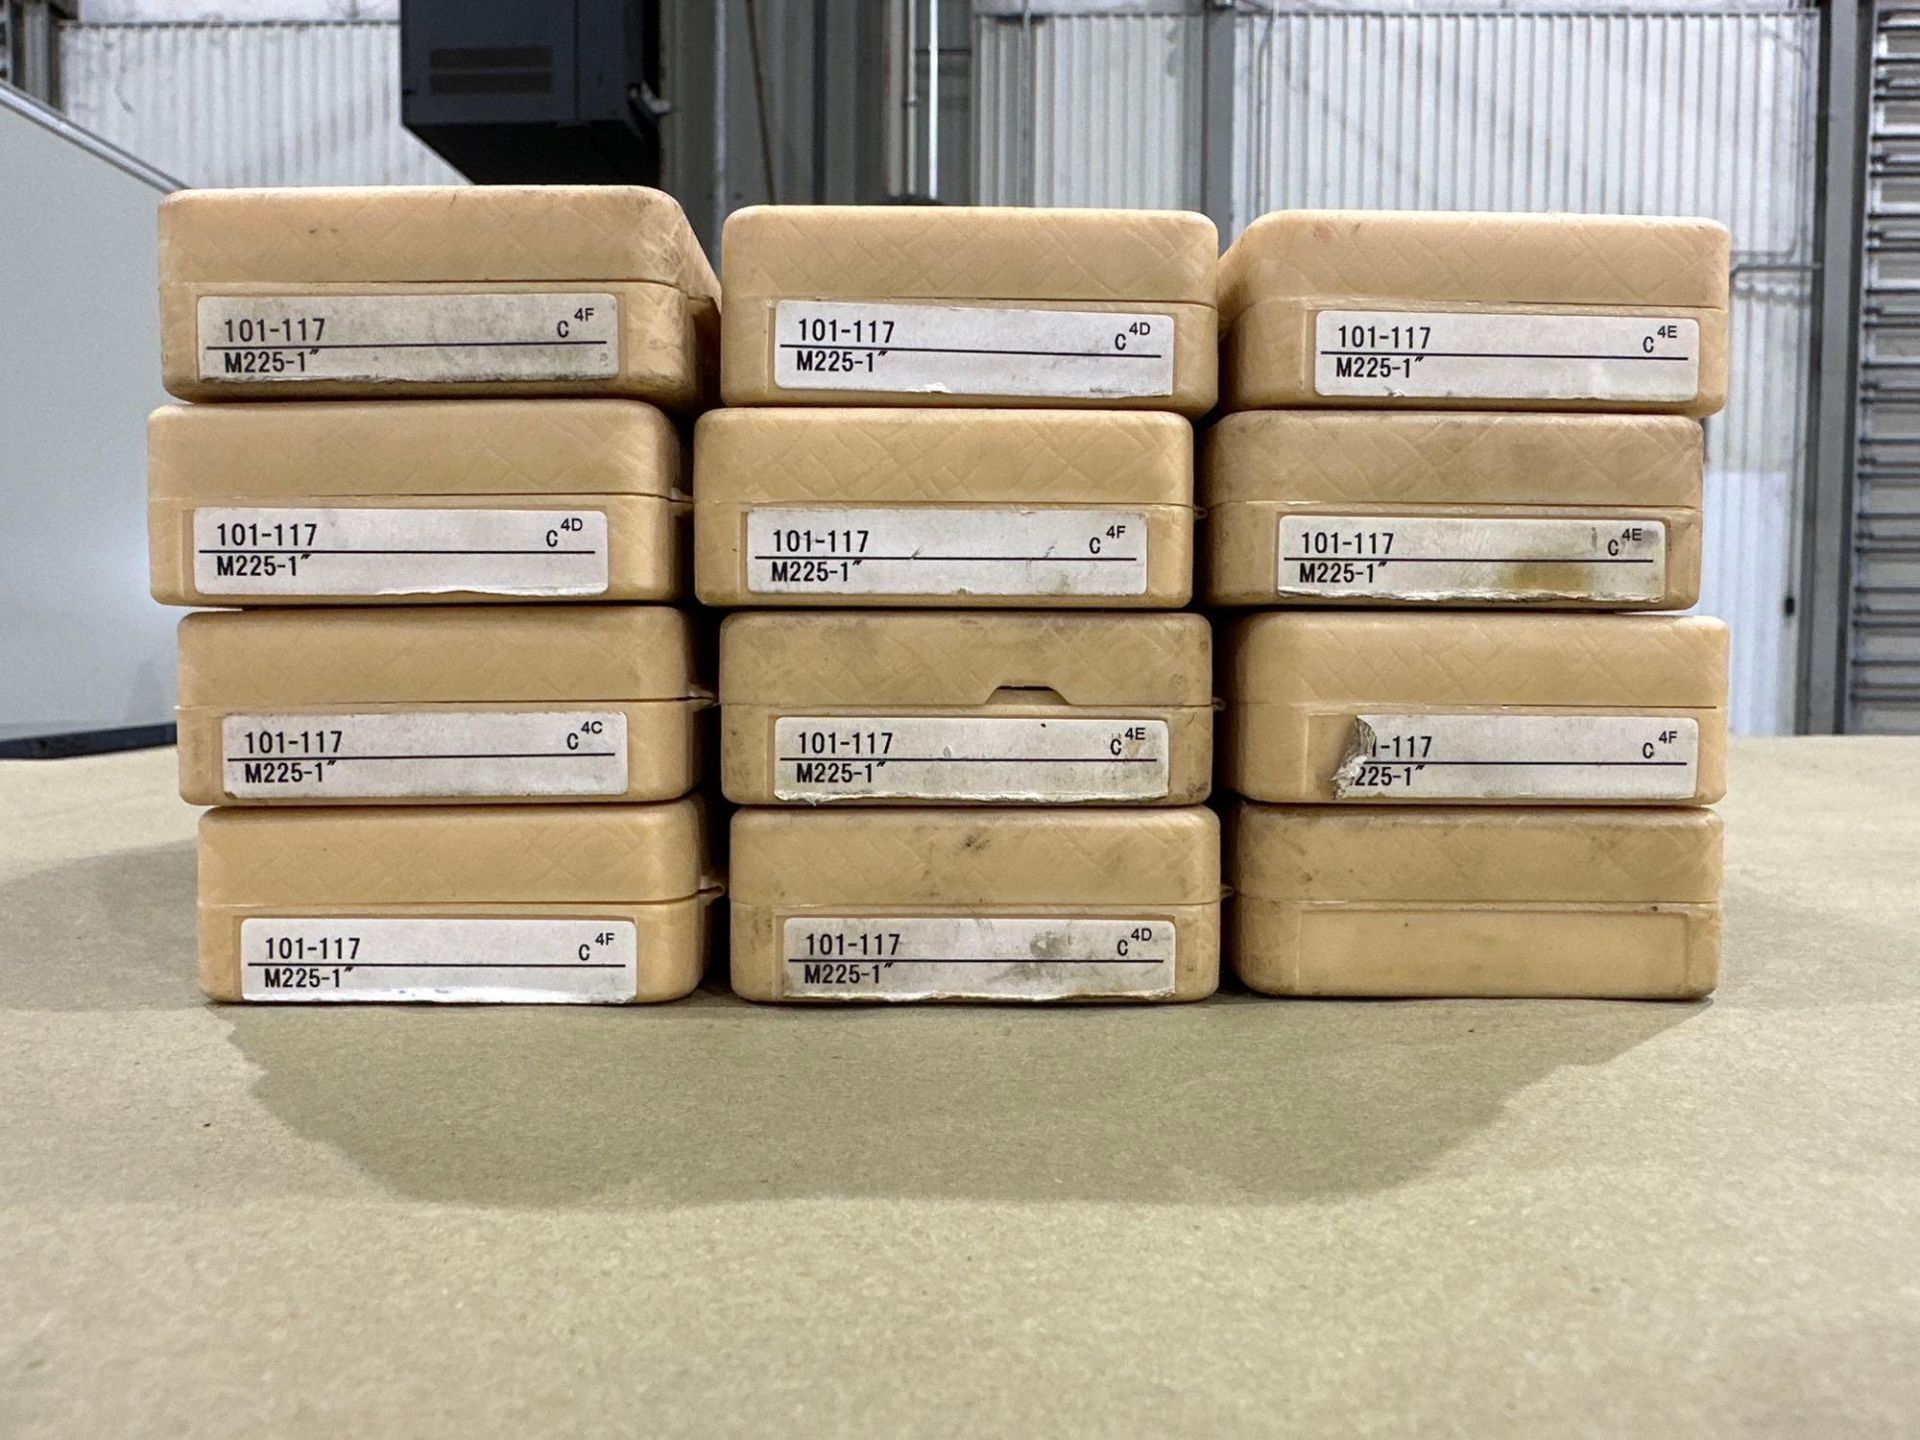 Lot of 12: Mitutoyo Mechanical OD Micrometer M225-1”, 0-1” Range, .0001” Graduation in plastic boxes - Image 4 of 7